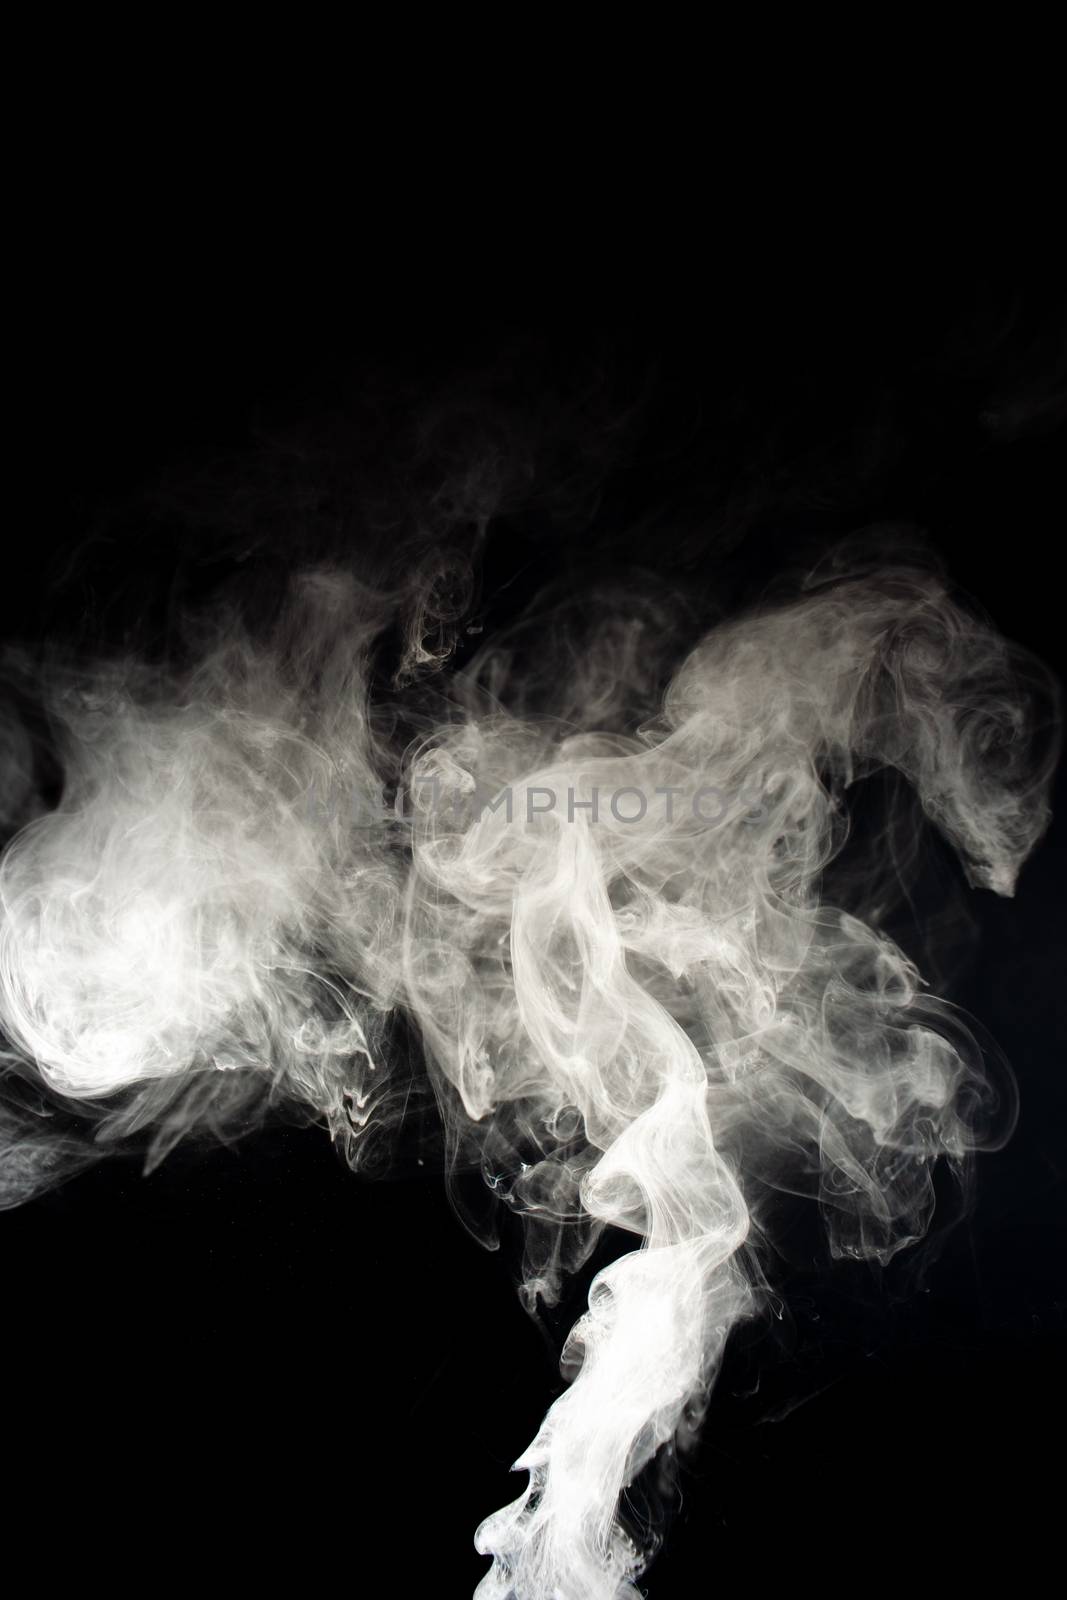 Vape steam spread with spray boiling liquid. Stock photo isolated on black background. Vape culture outreach. Conceptual image.